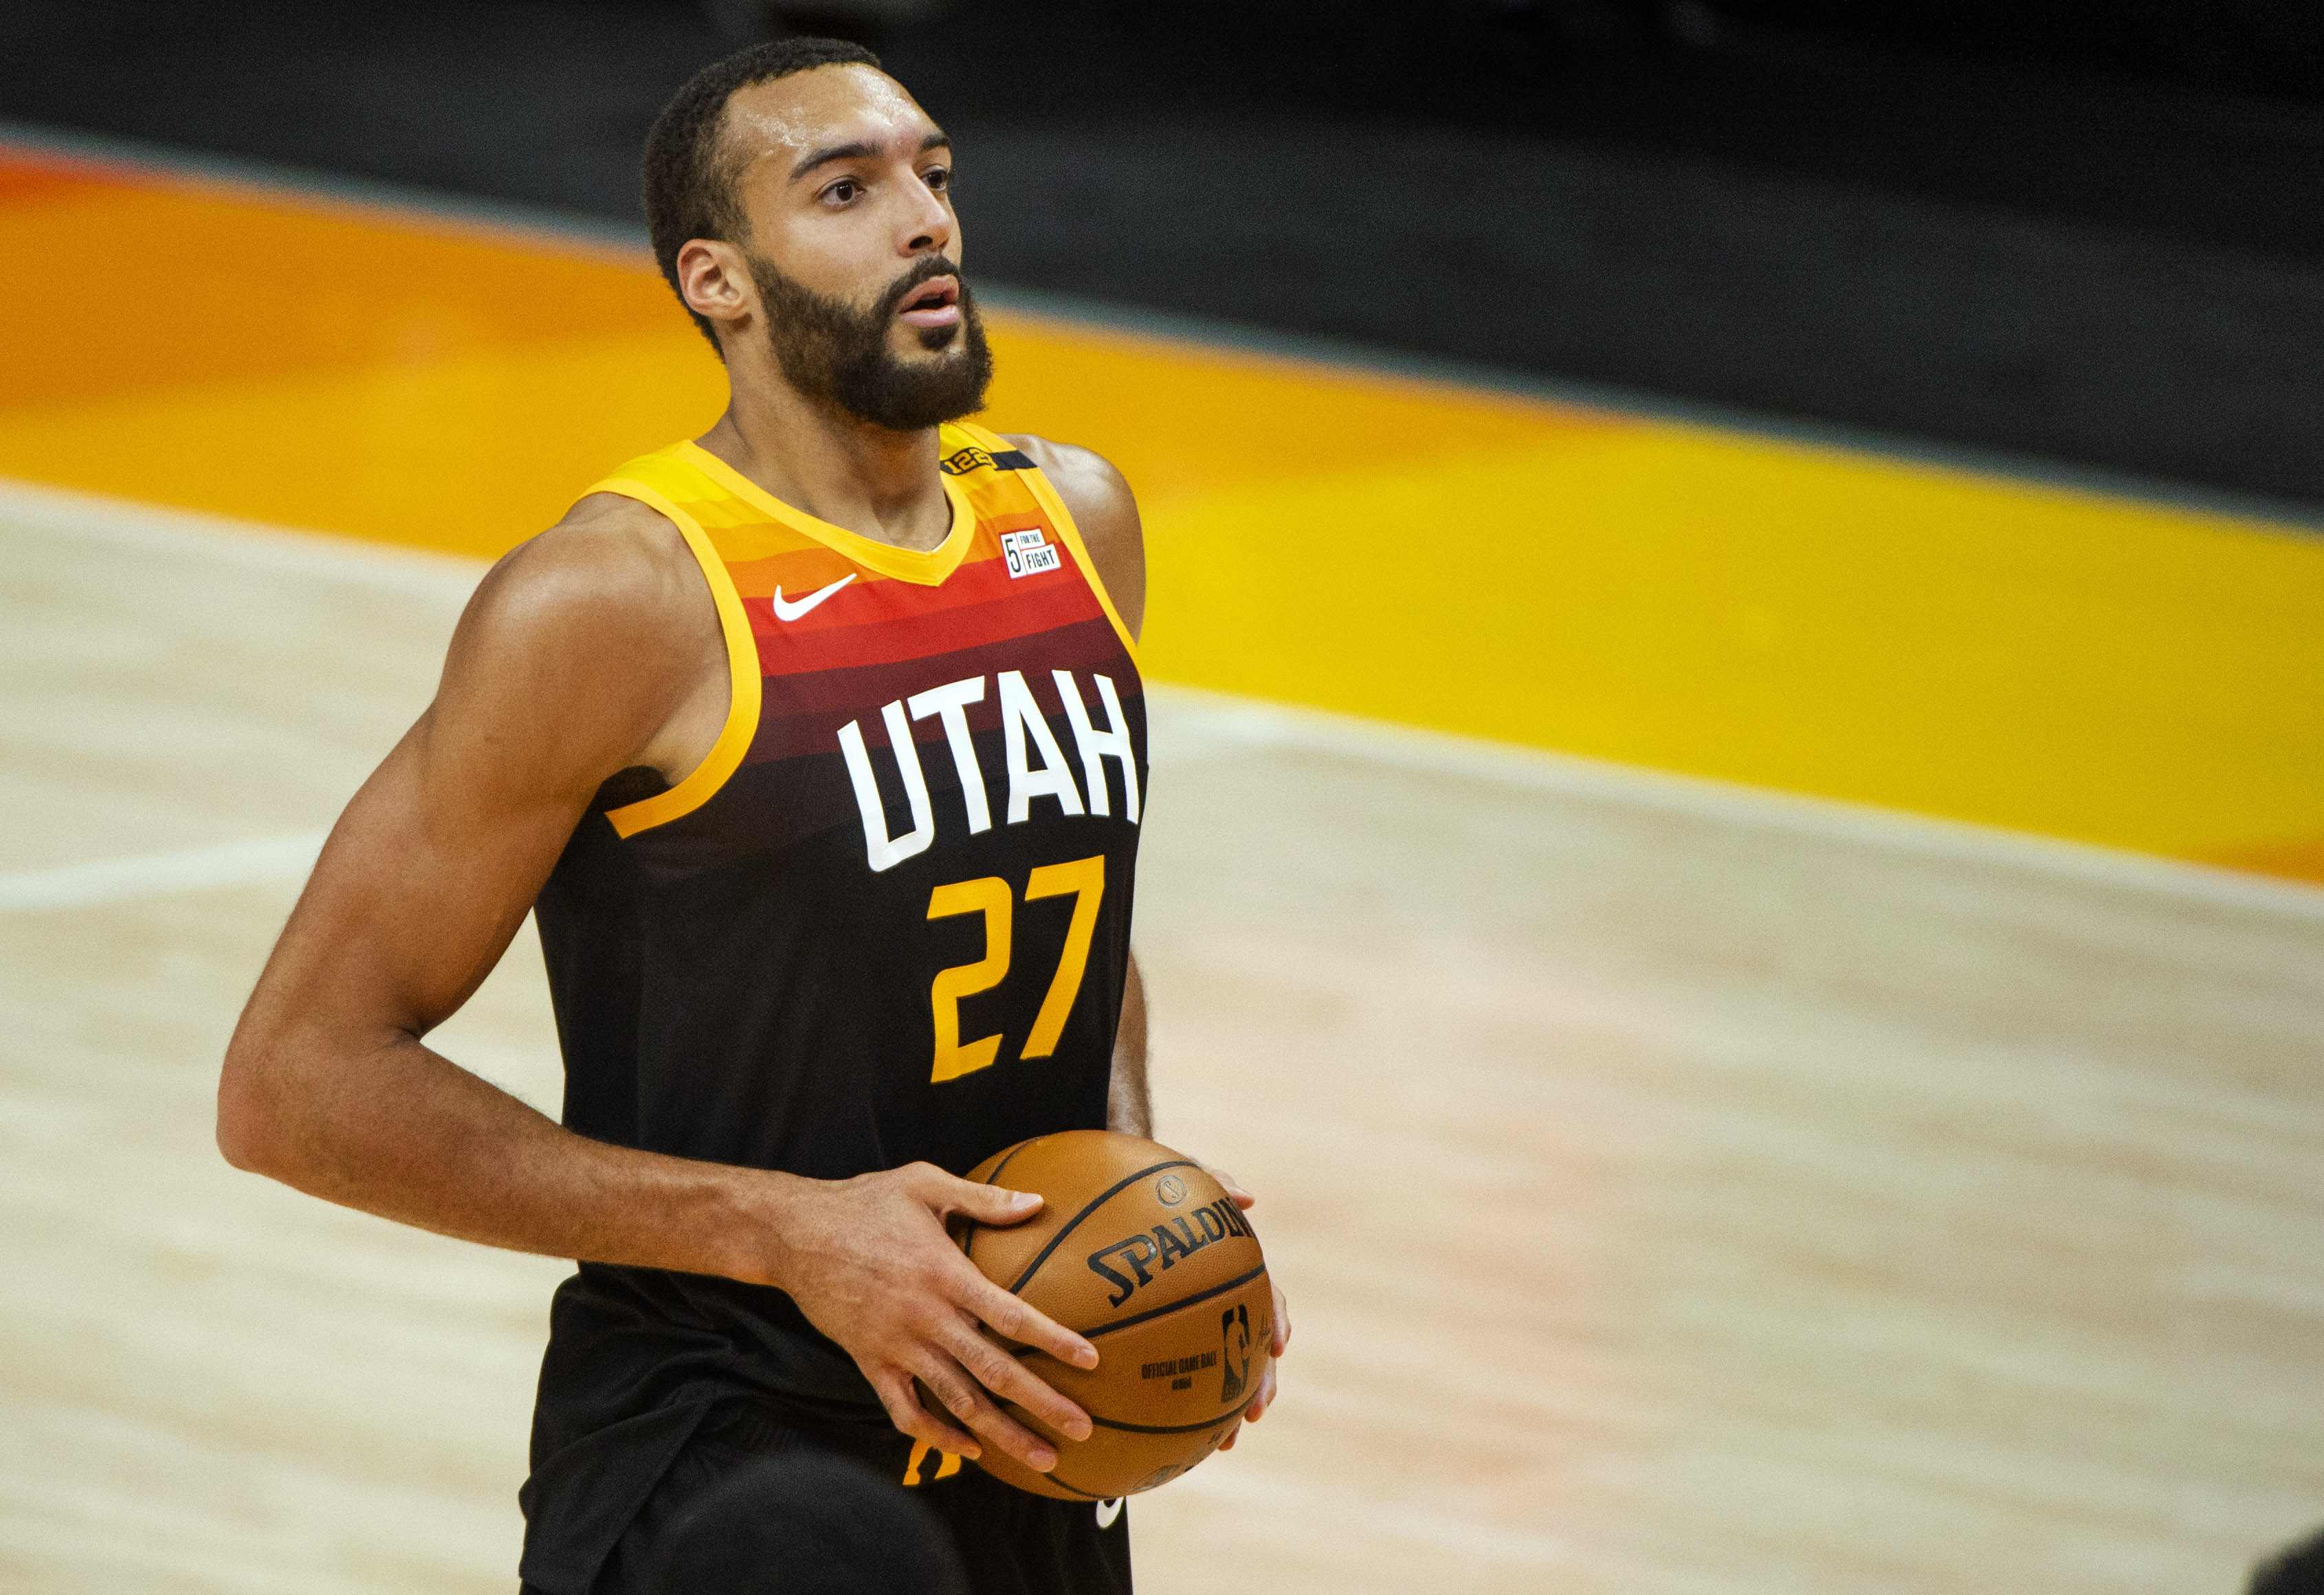 Weekly Run Newsletter Rudy Gobert On Donovan The All Star Game And Busting Out Some Spanish